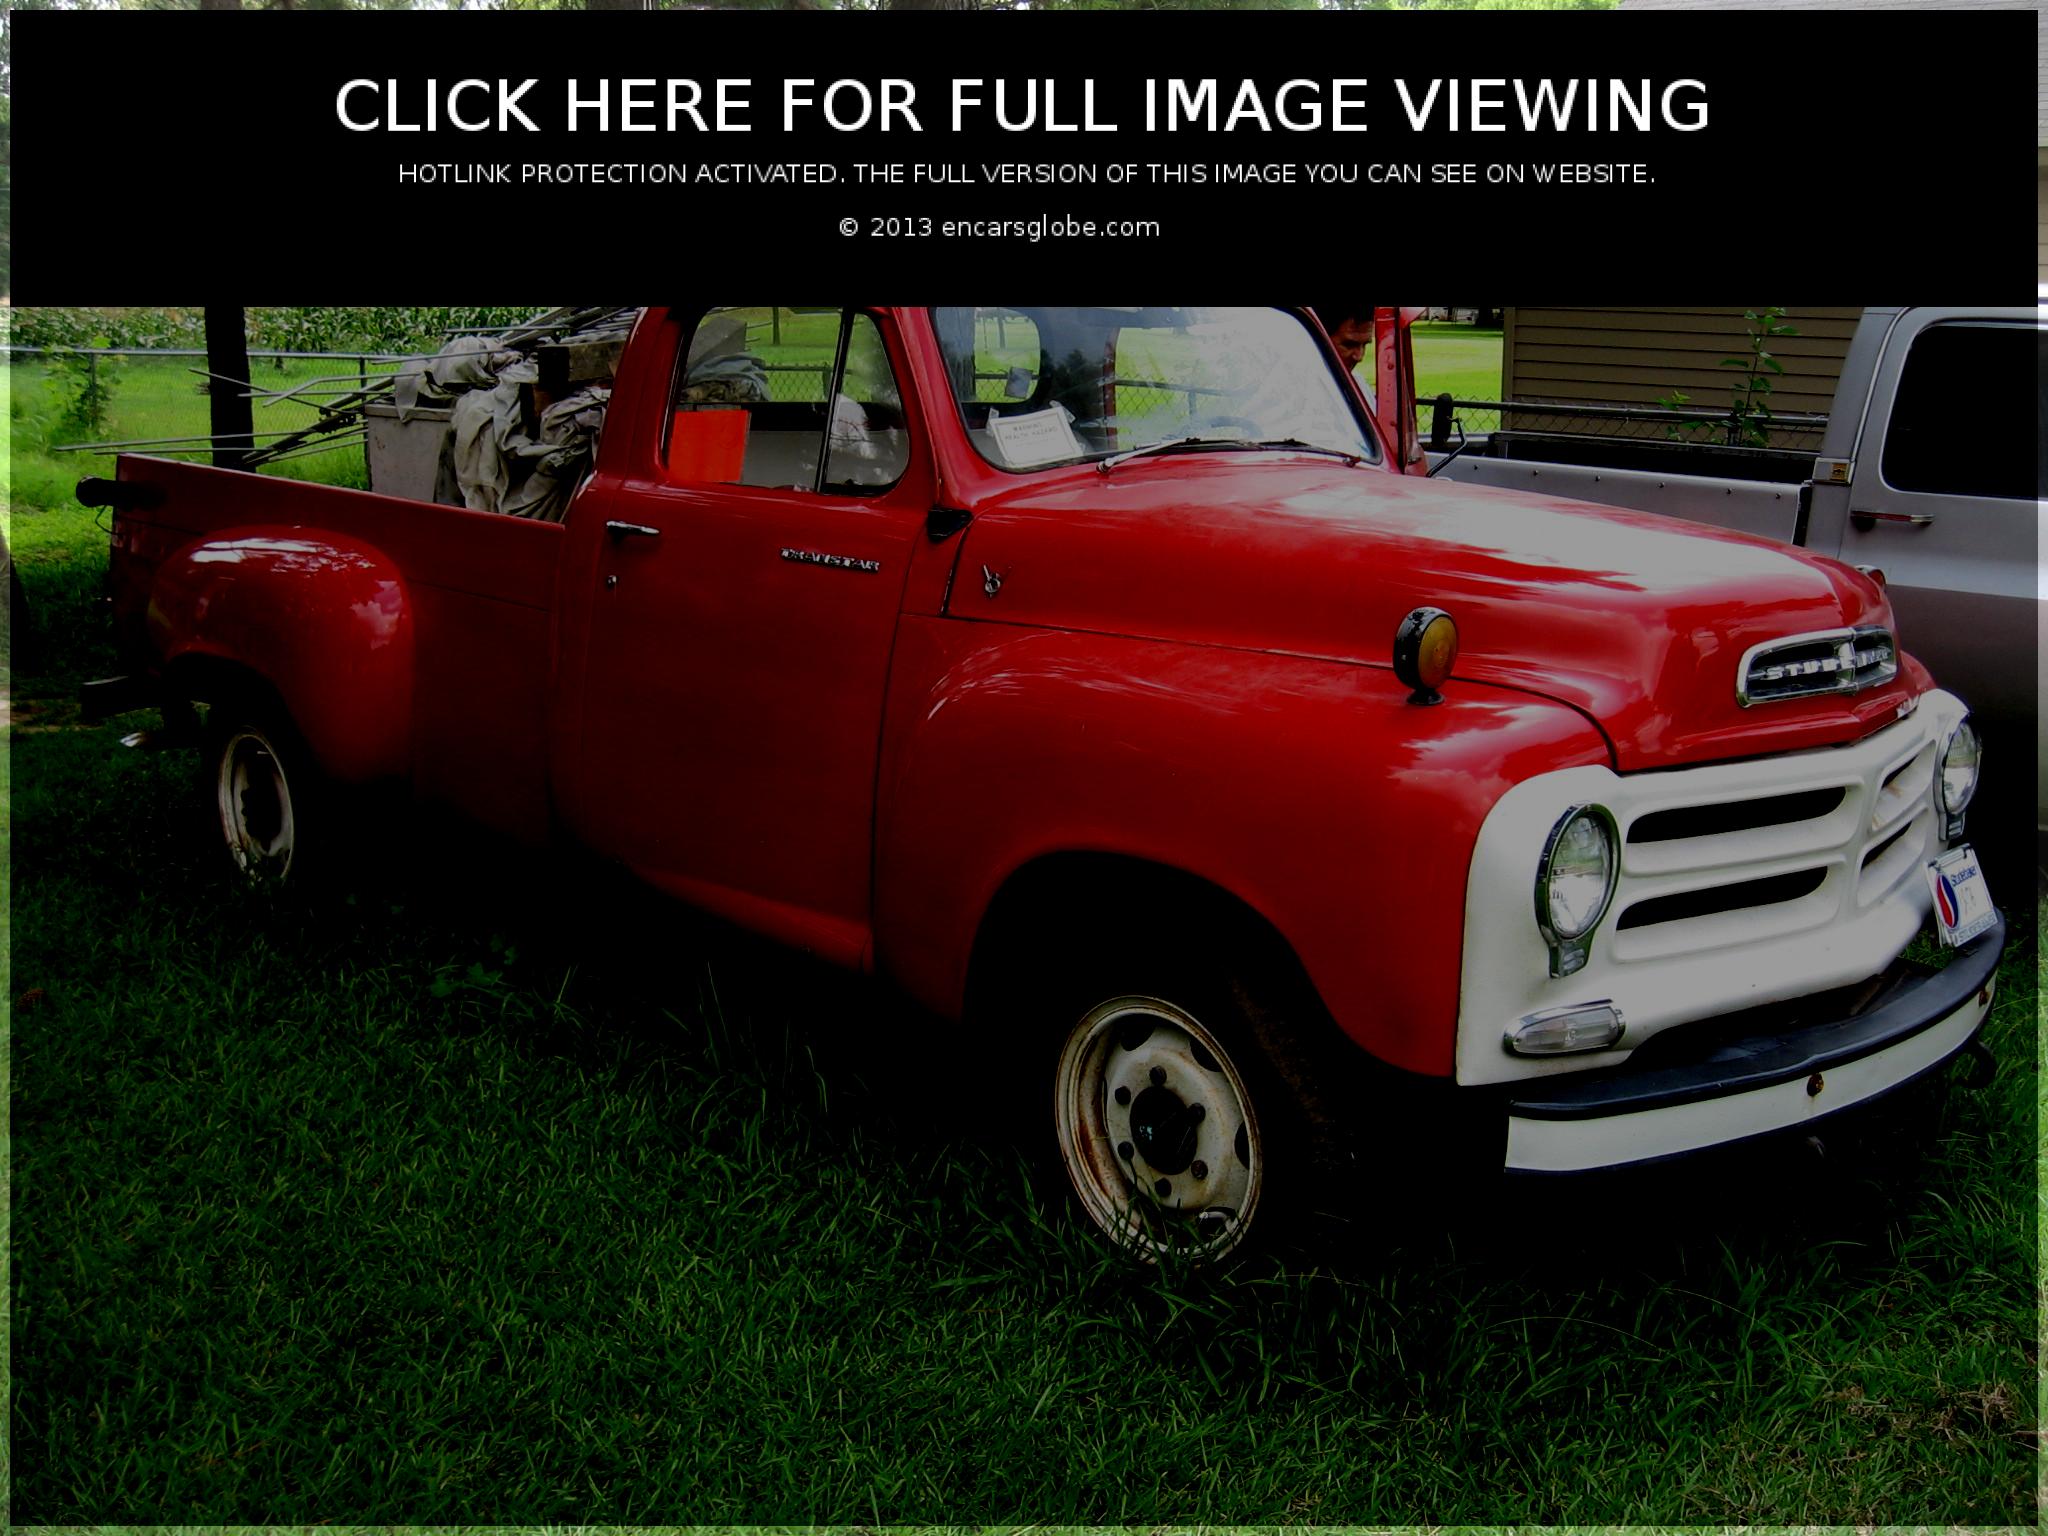 Studebaker Transtar Photo Gallery: Photo #10 out of 11, Image Size ...